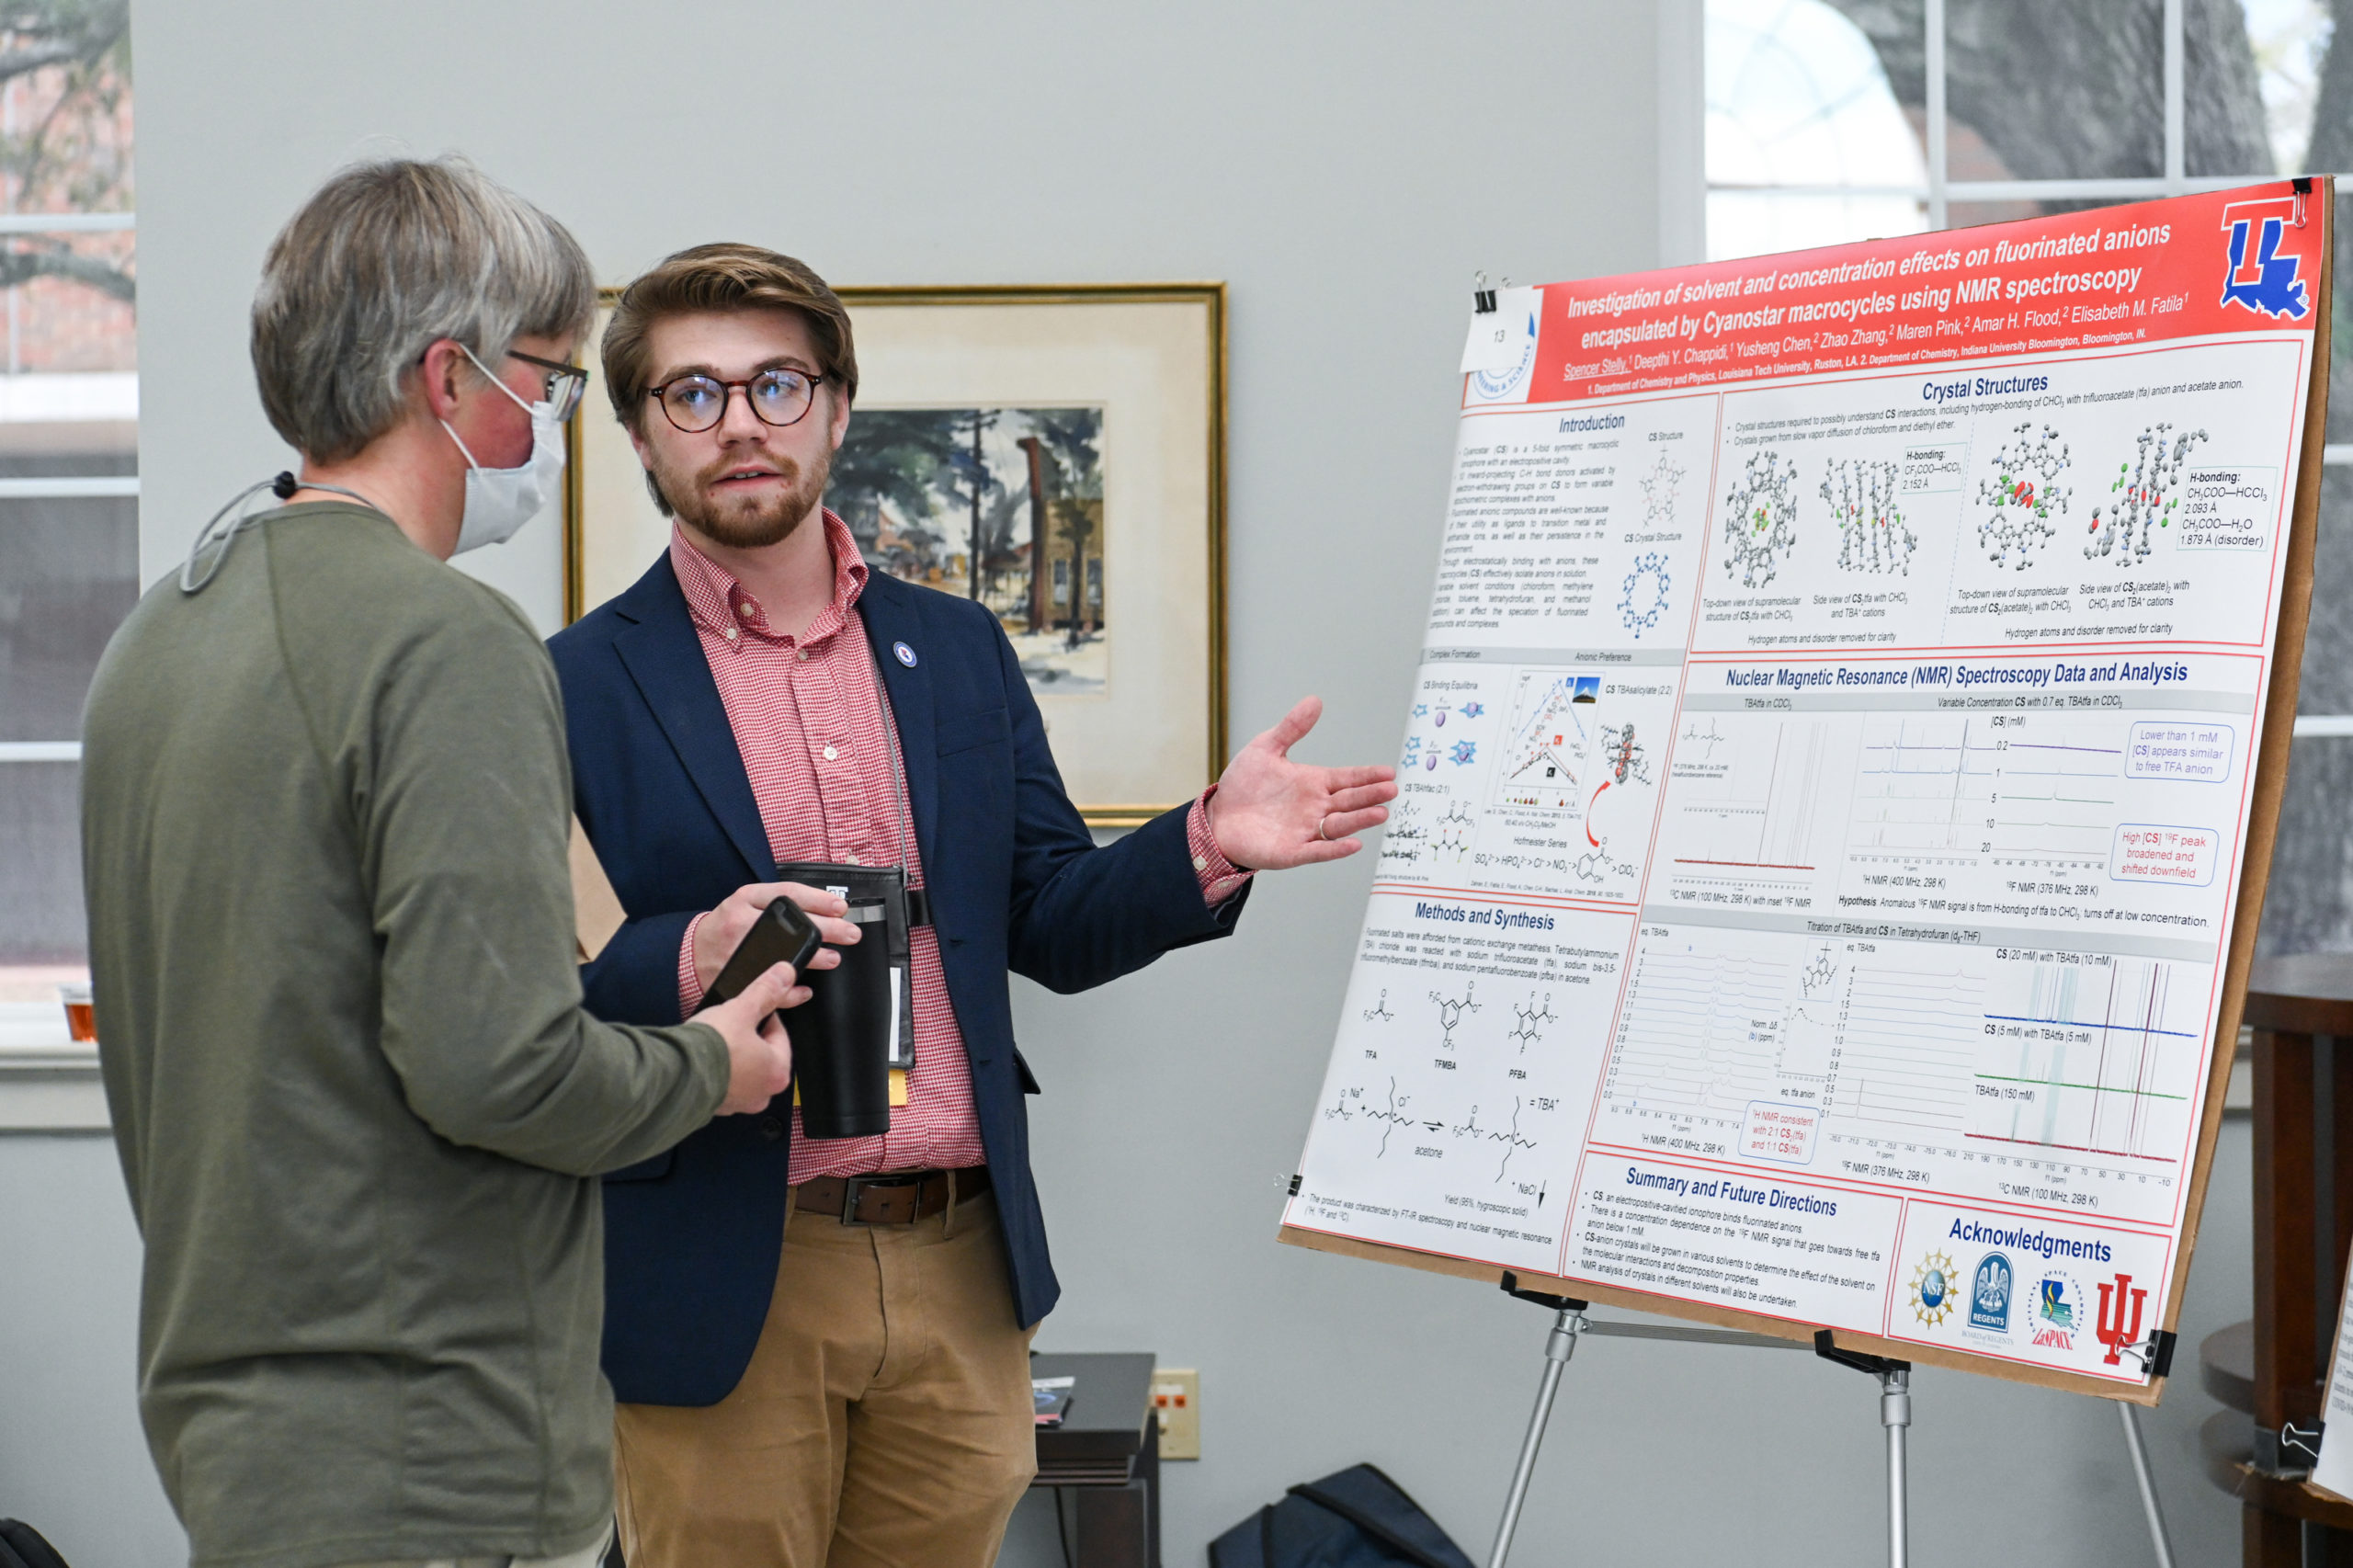 Attendees discussing a poster at the Undergraduate Research Symposium